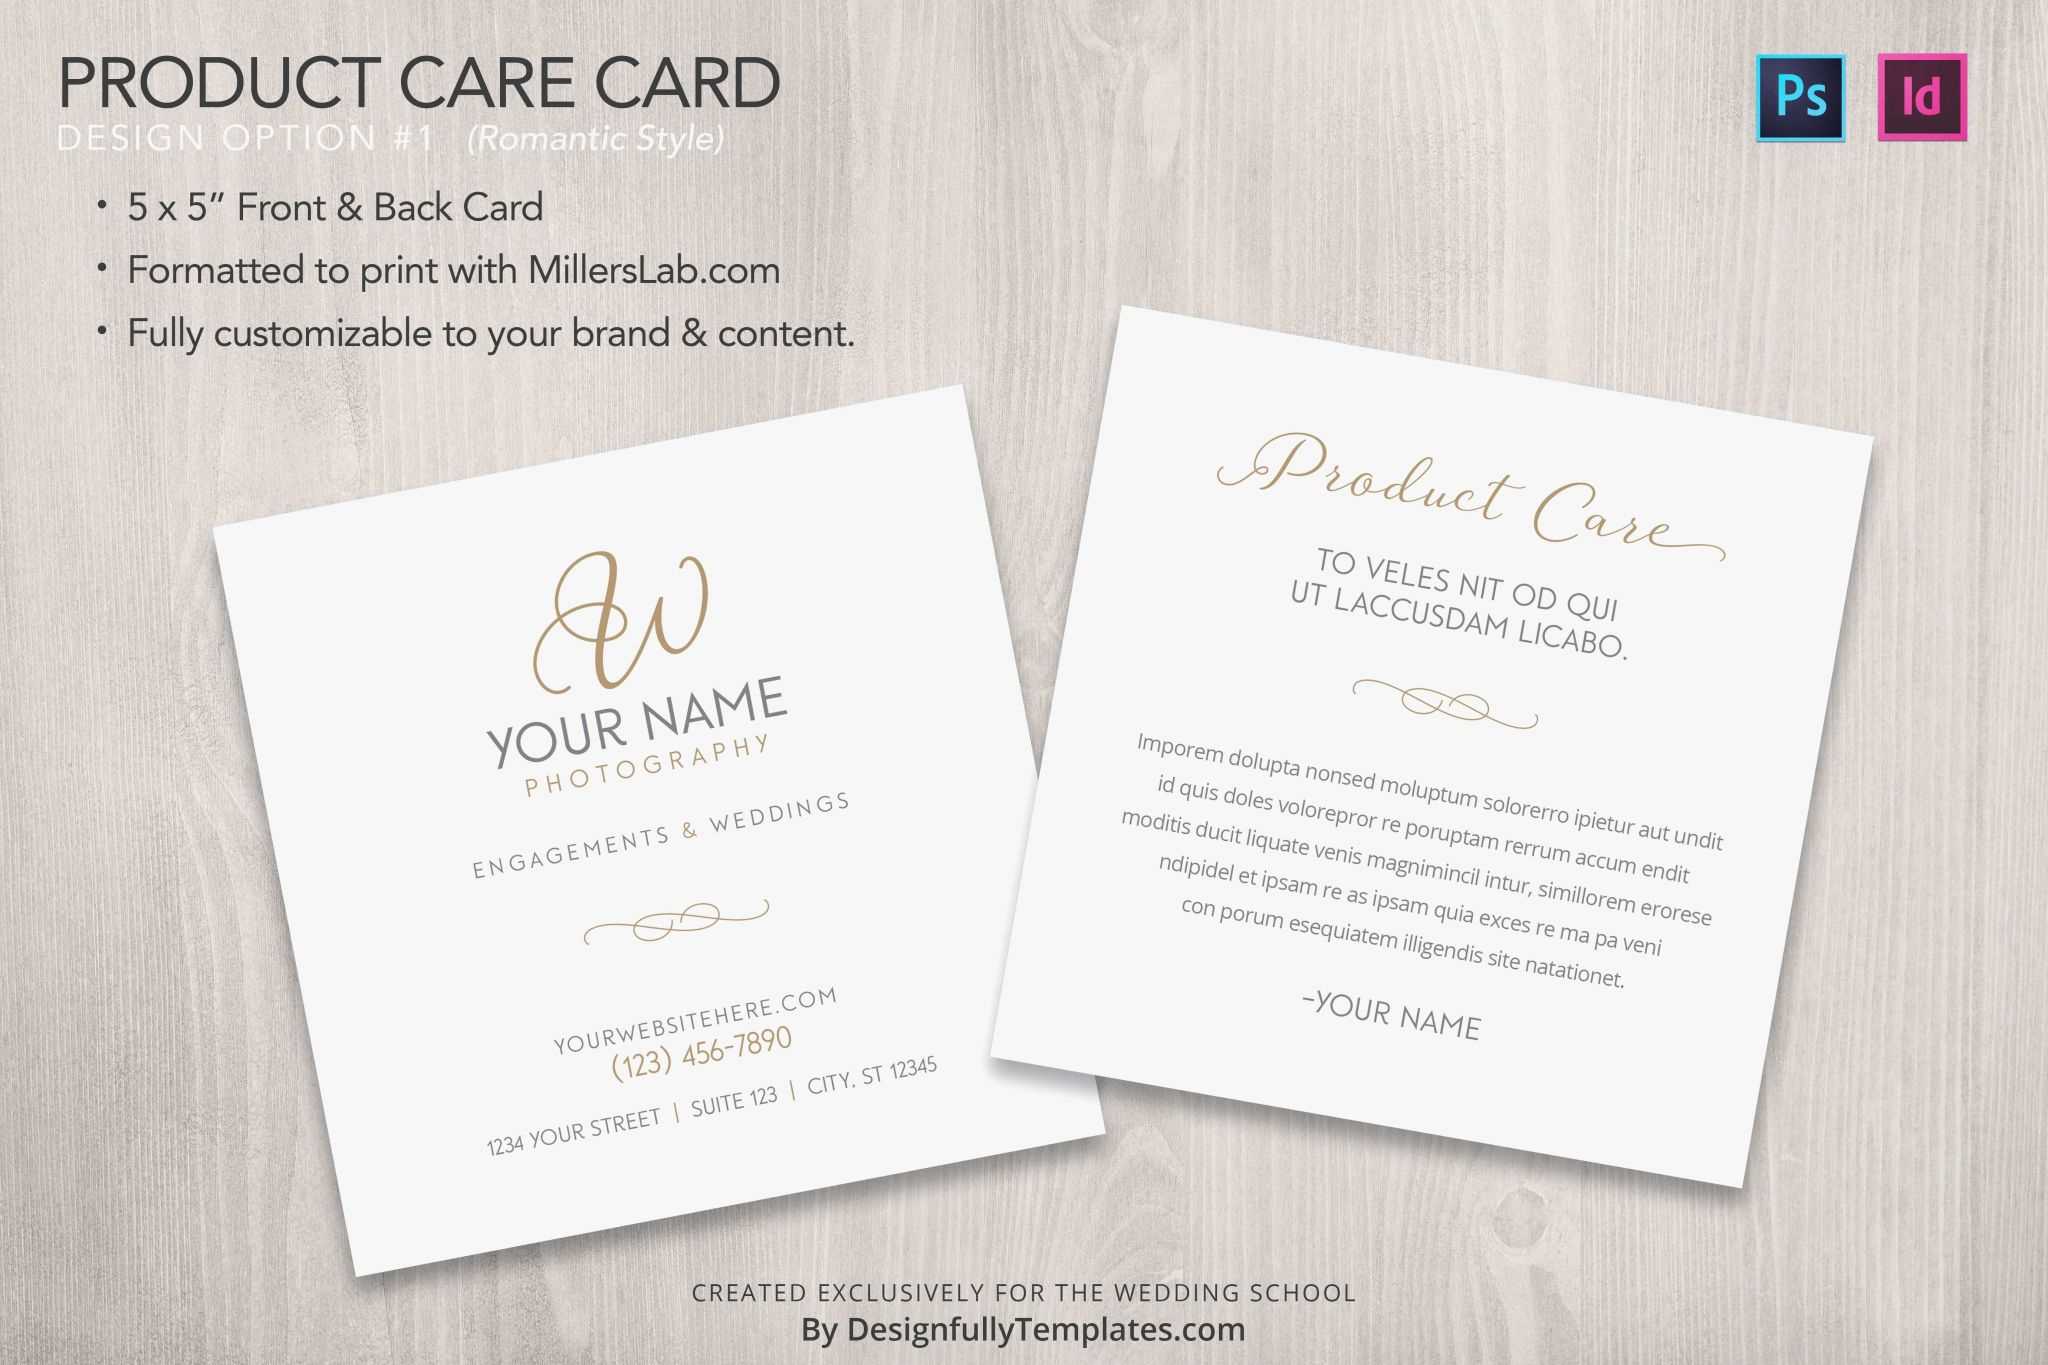 Free Place Card Templates 6 Per Page – Atlantaauctionco Intended For Place Card Template 6 Per Sheet